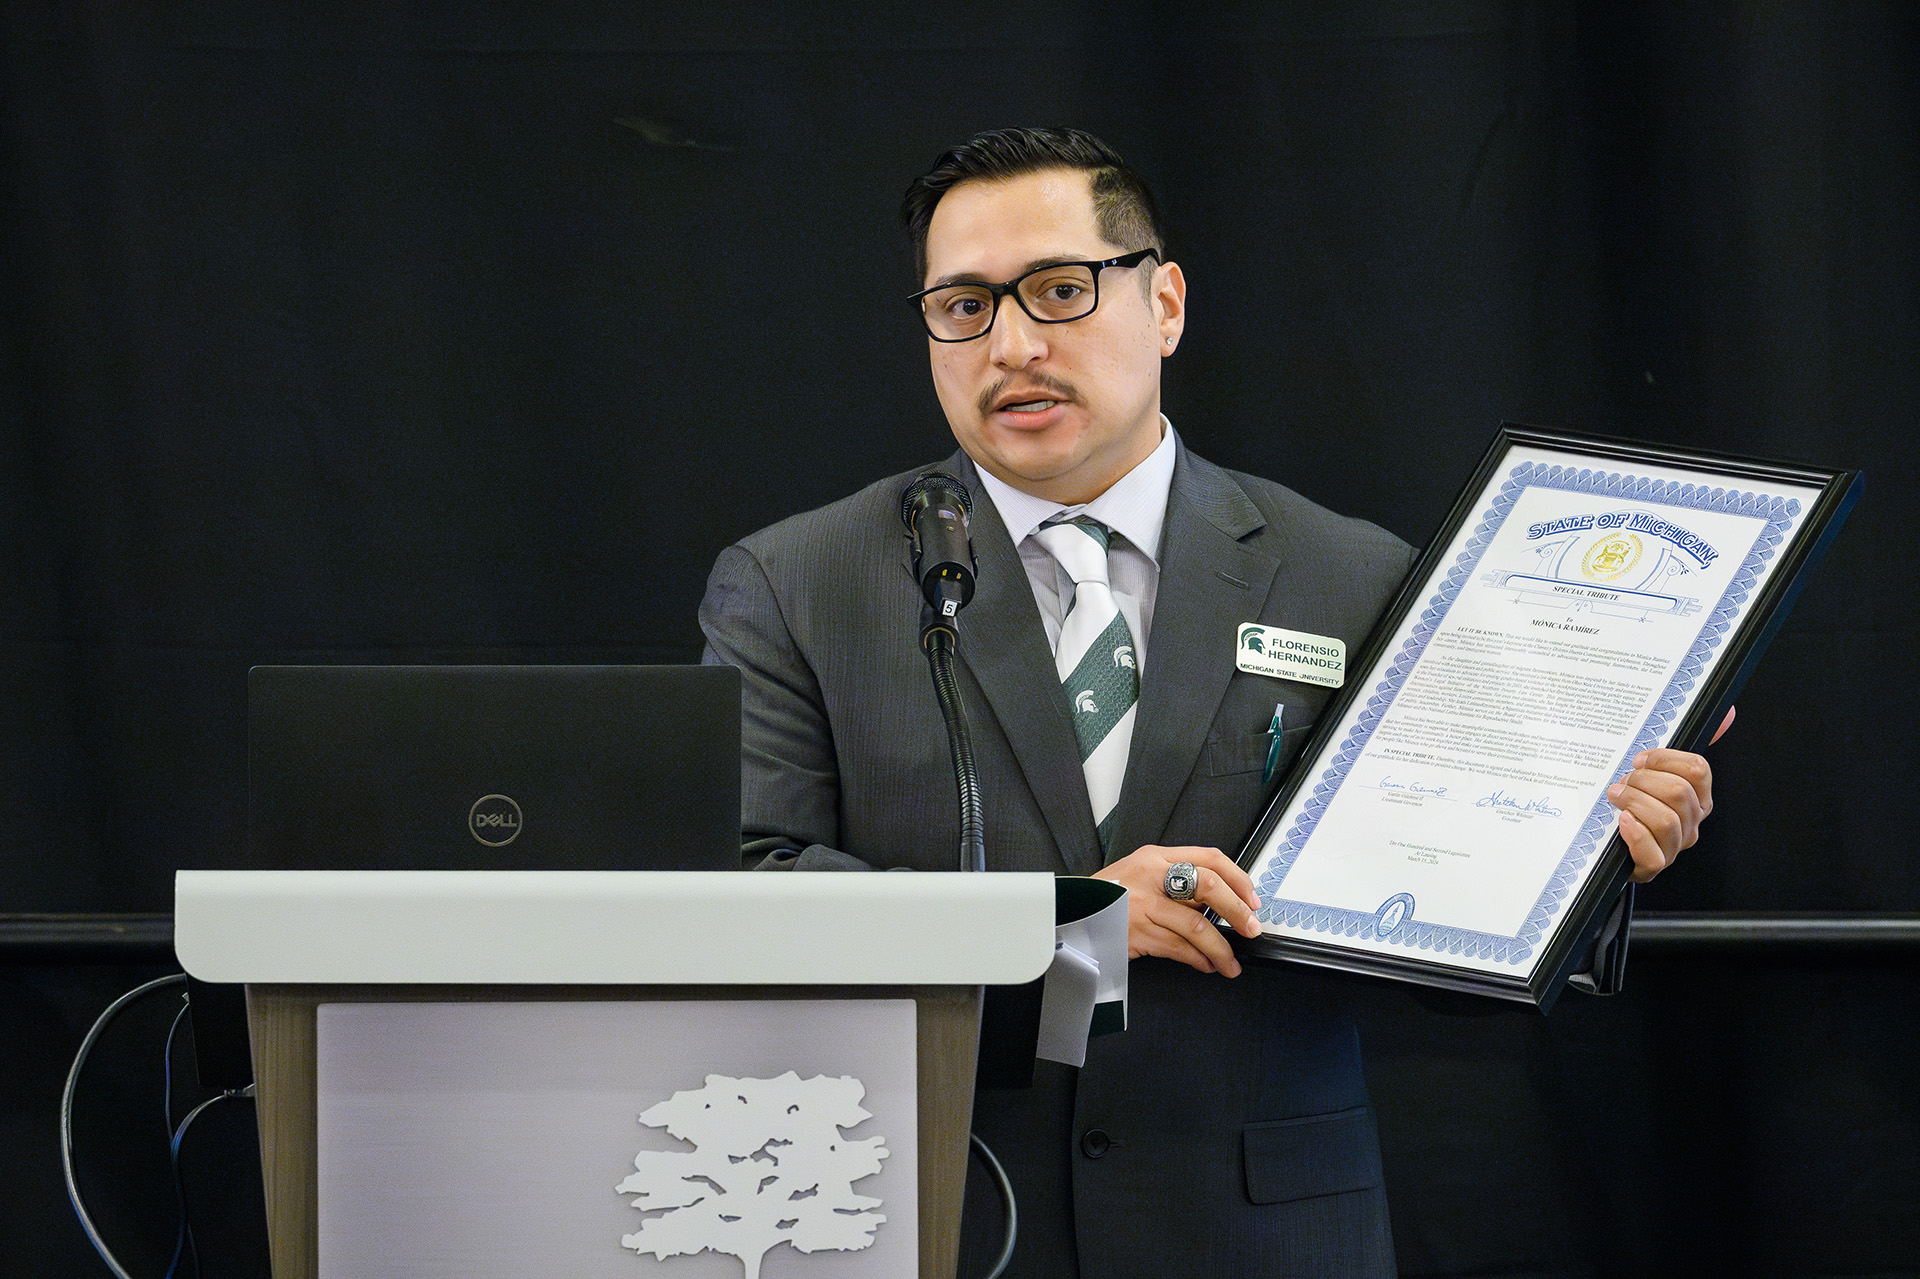 Florensio Hernandez speaks at the lectern holding a large framed Michigan state certificate recognition